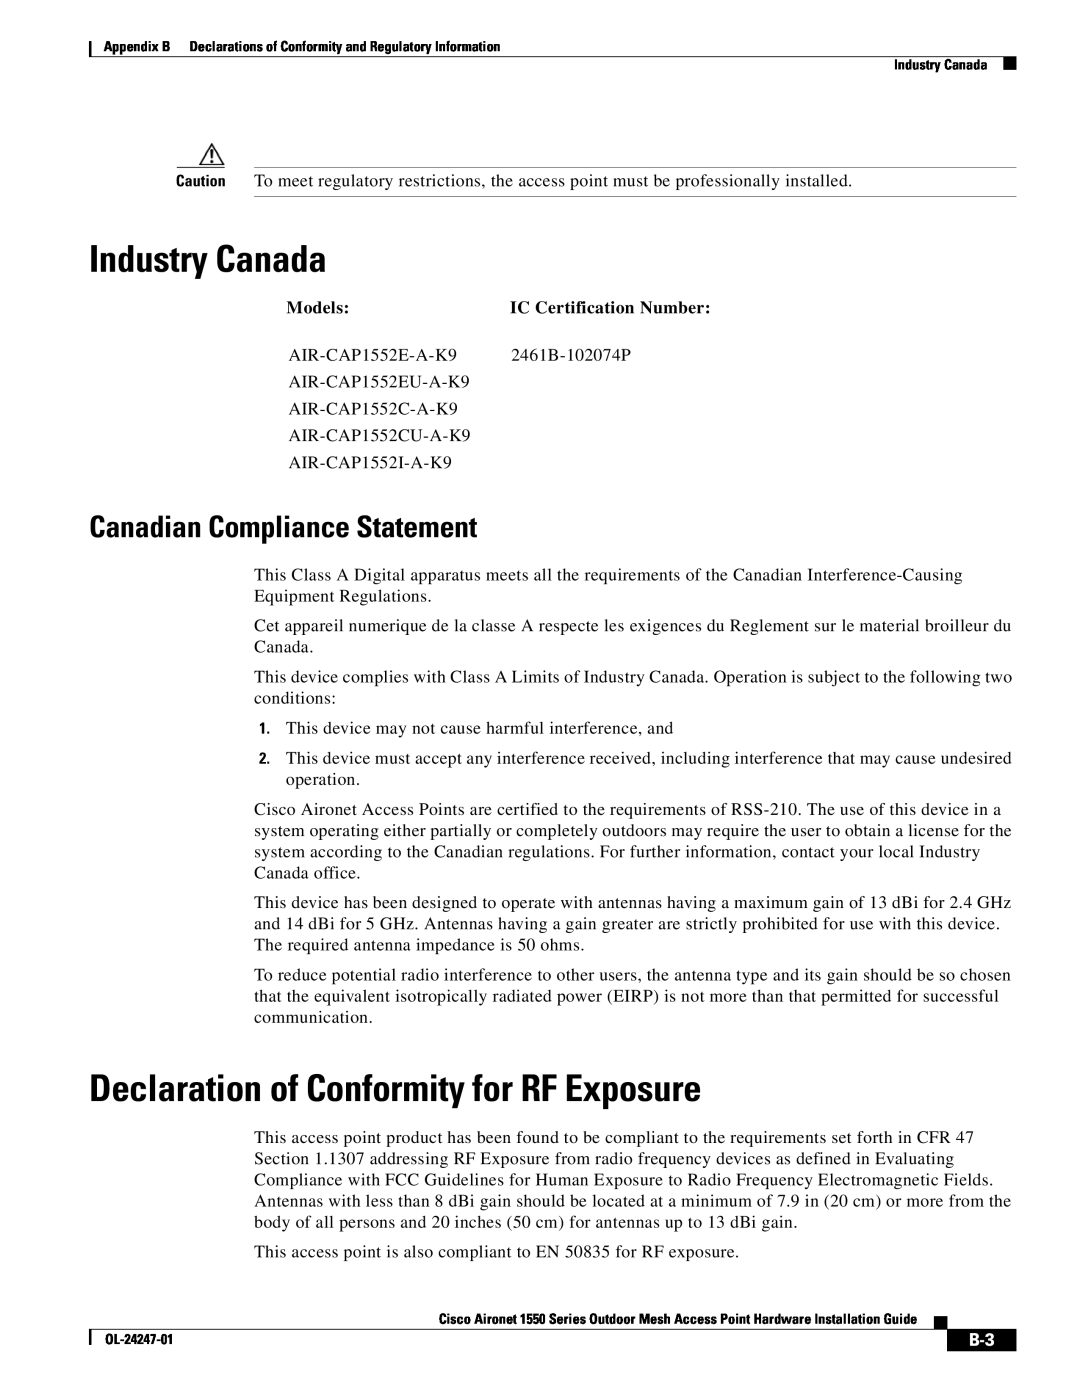 Cisco Systems AIRCAP1552EUAK9 Industry Canada, Declaration of Conformity for RF Exposure, Canadian Compliance Statement 